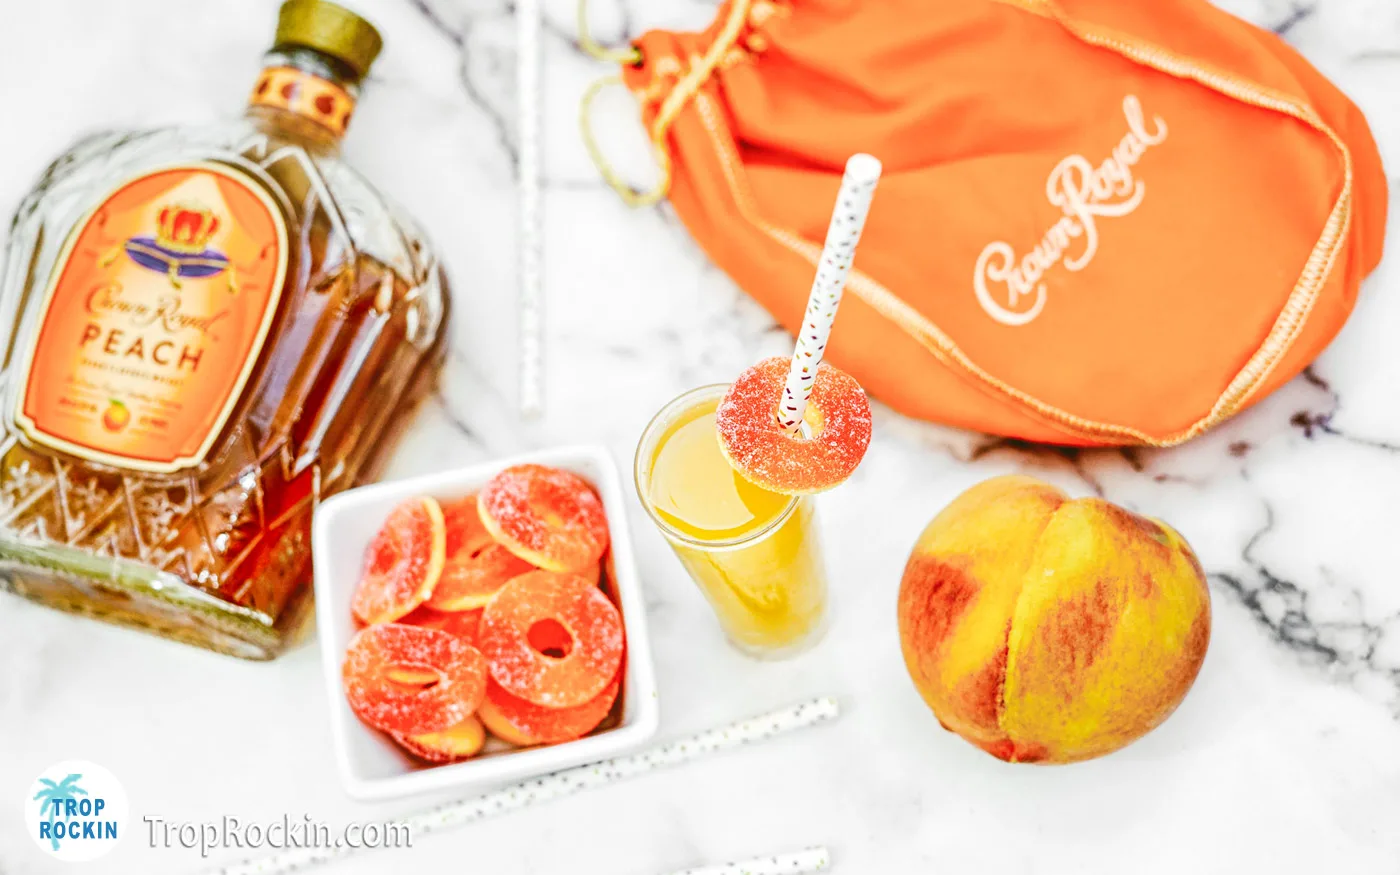 Single shot with crown royal peach bottle in background and a bowl of peach rings.